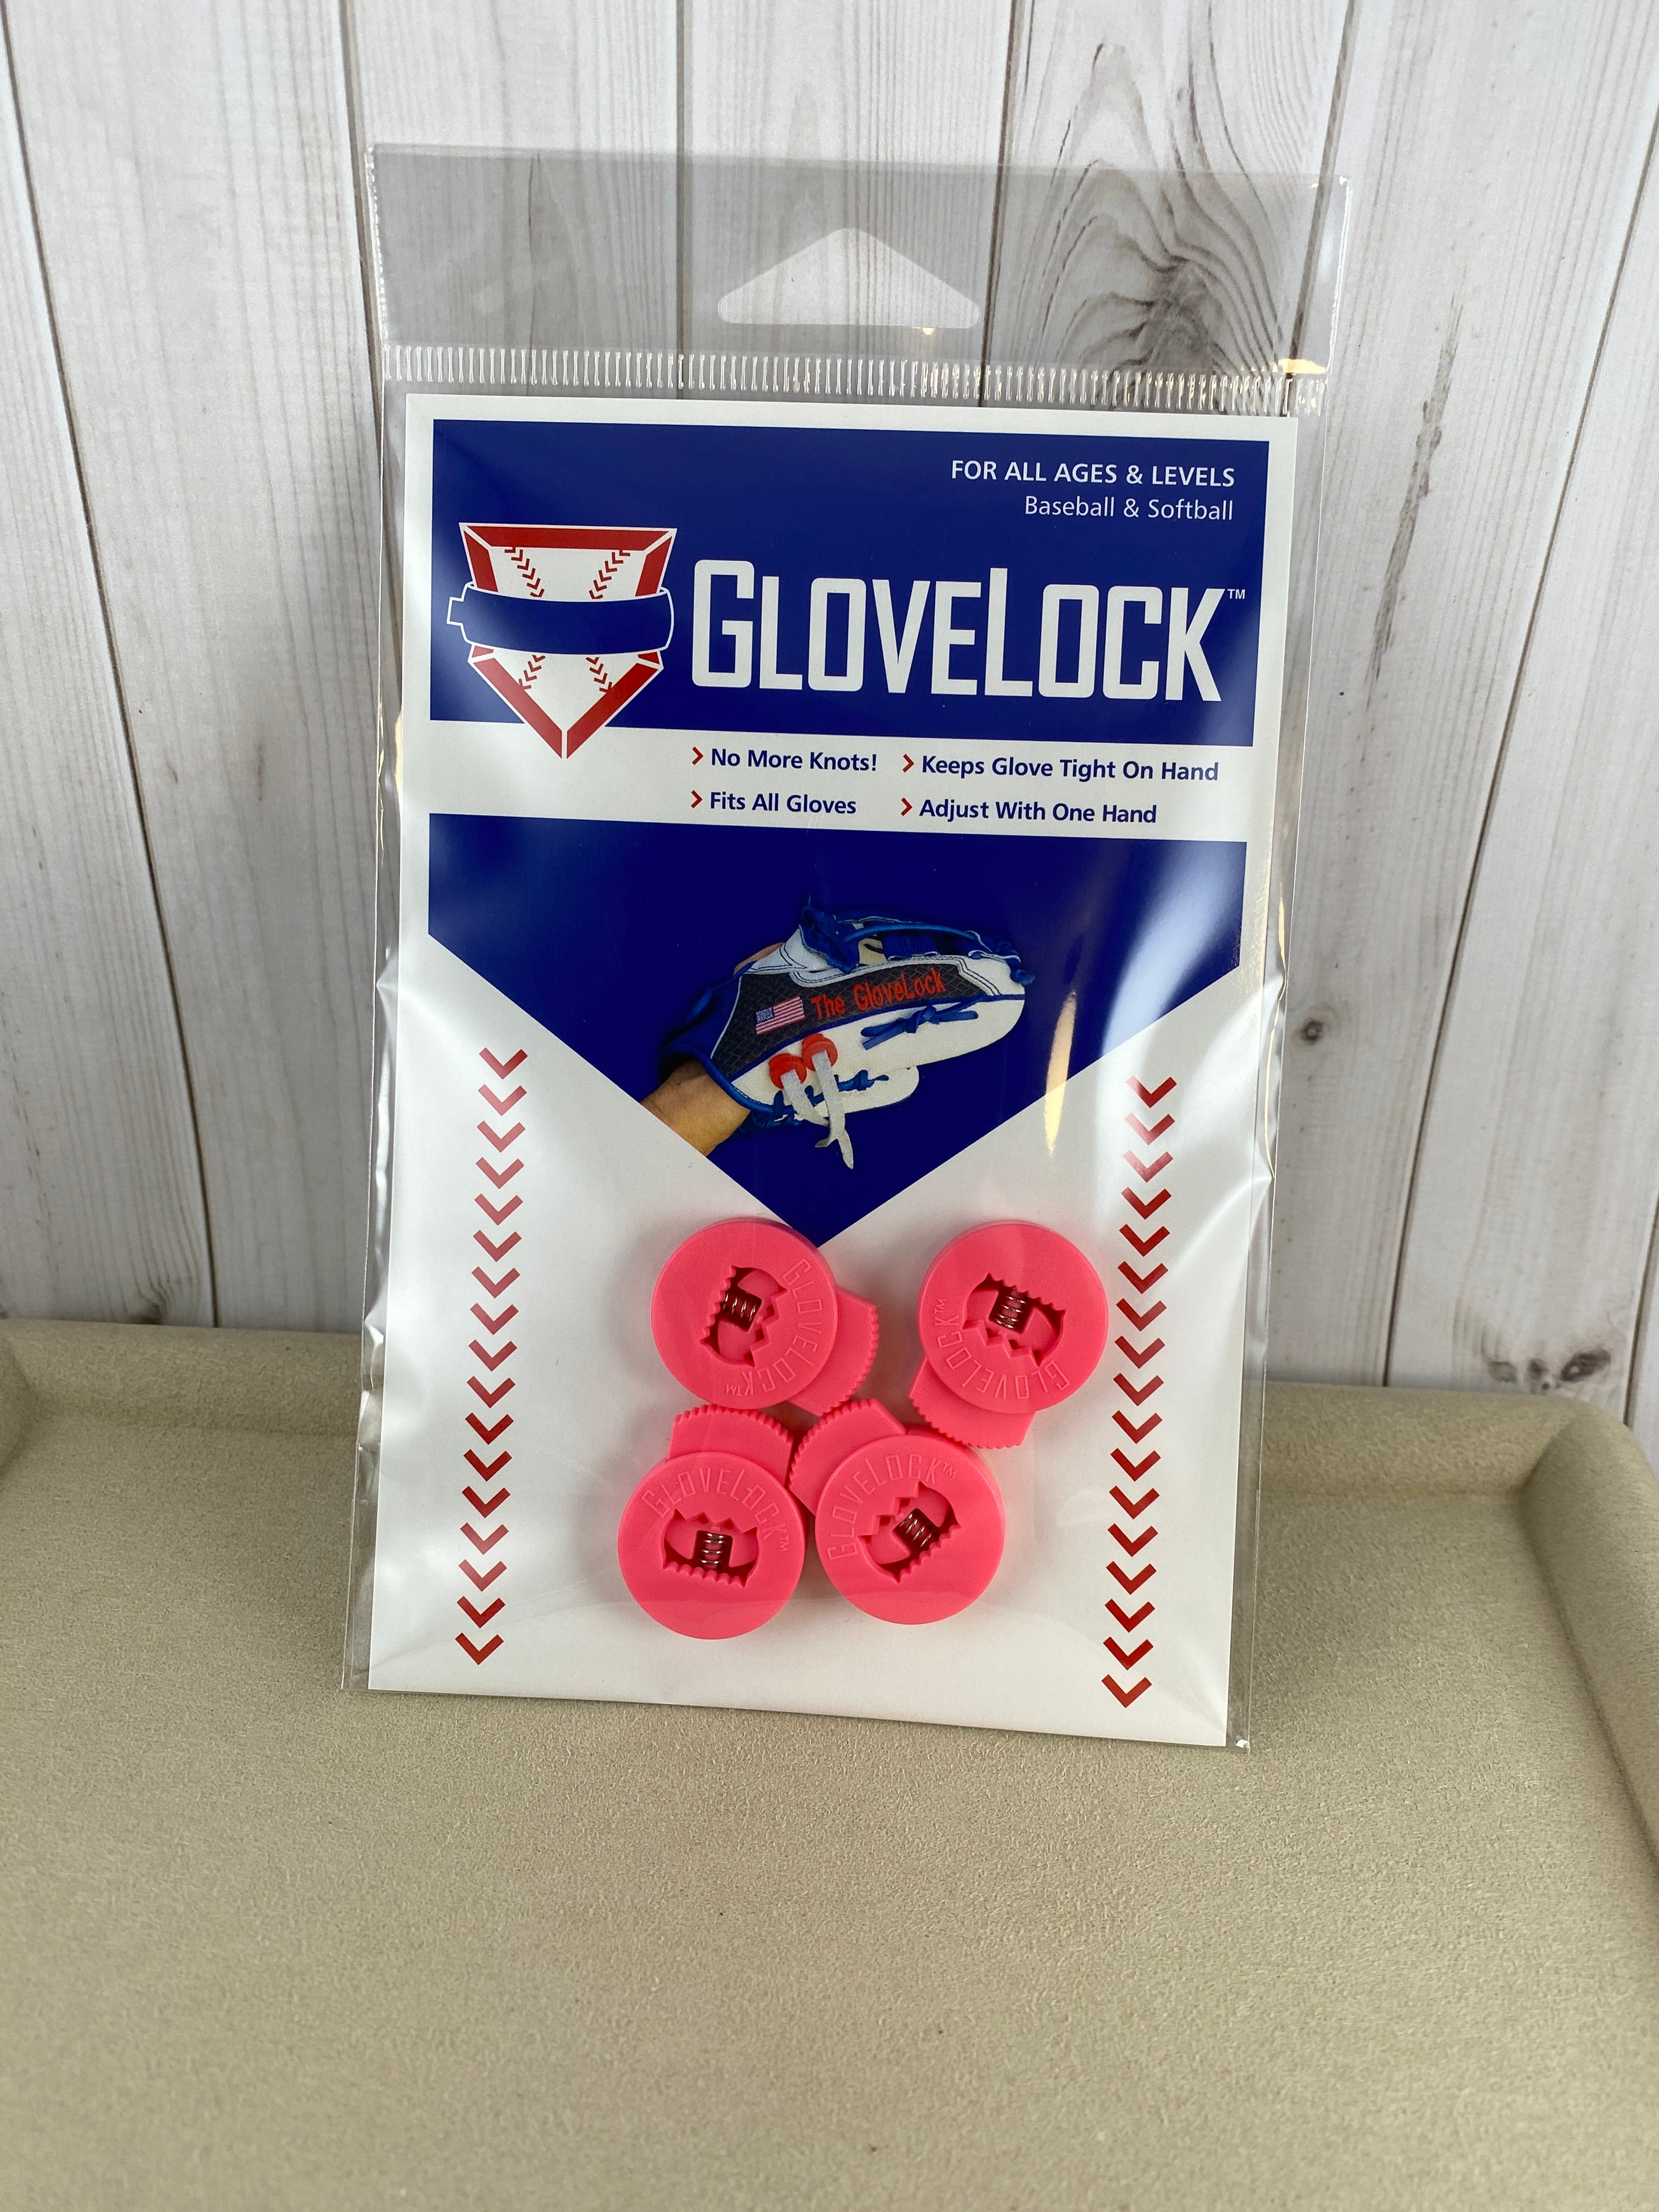 GLOVELOCK for baseball Gloves they tighten Baseball and softball Glove laces